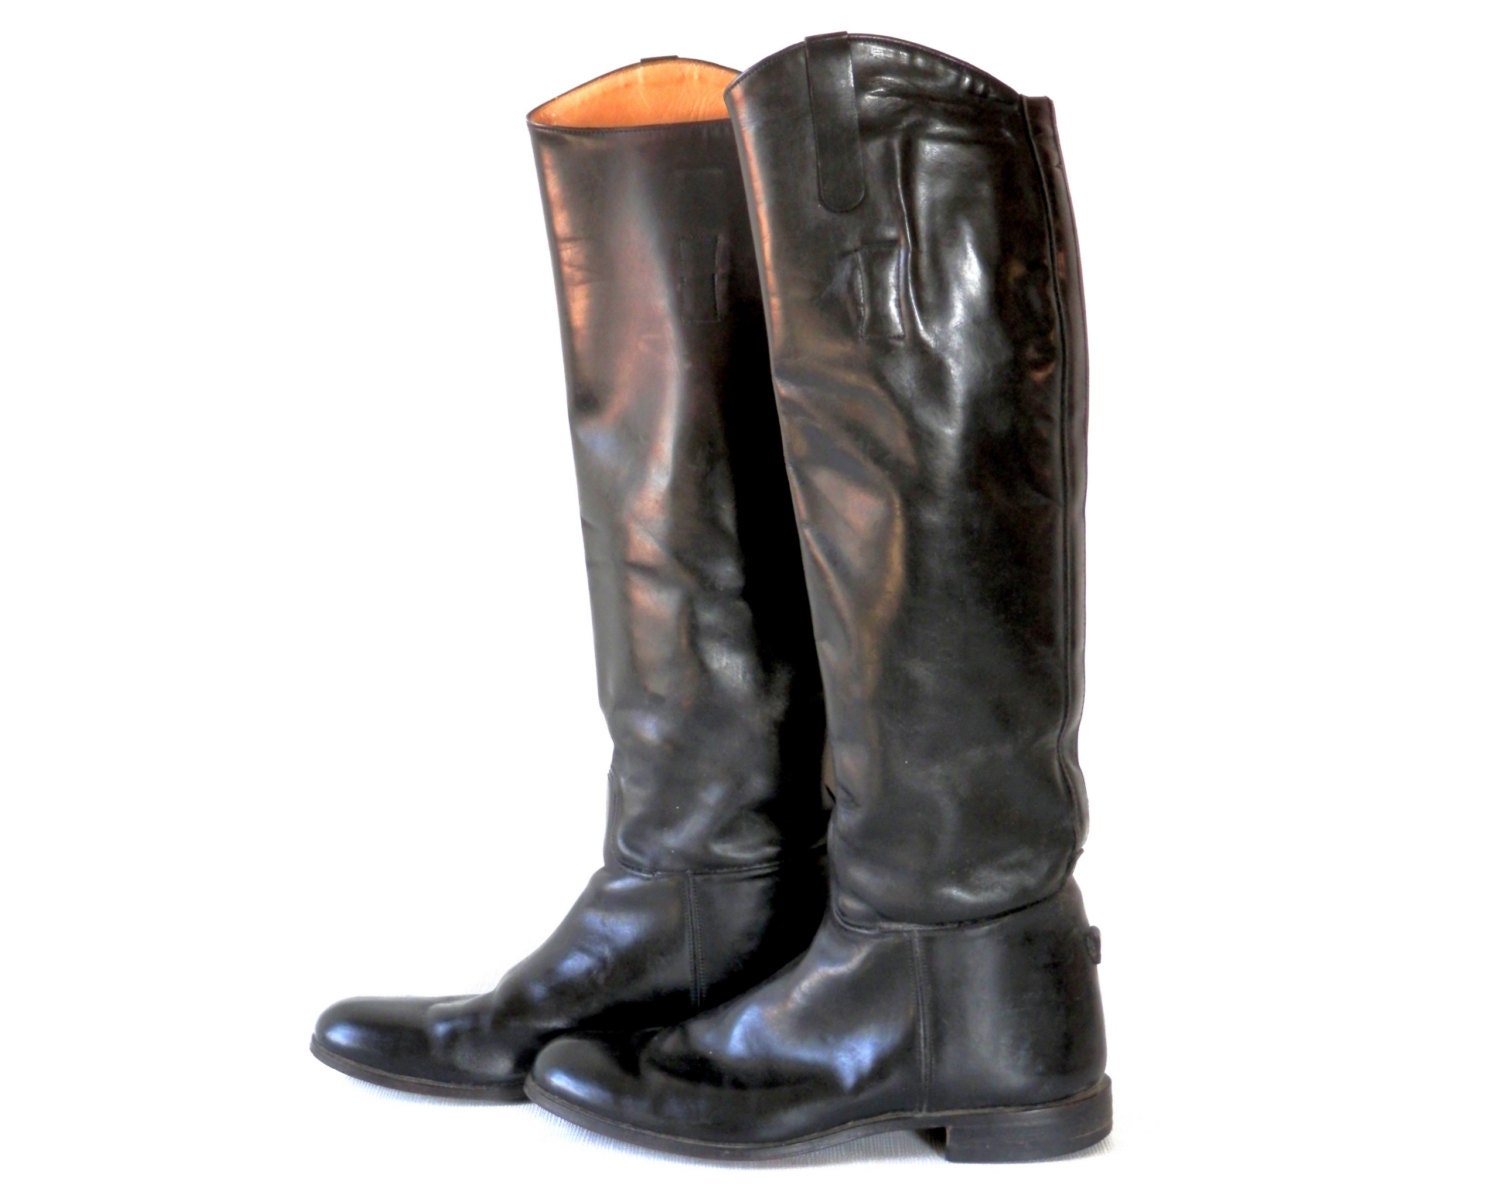 Black Leather Riding Field Boots by Grand Prix Riding Apparel